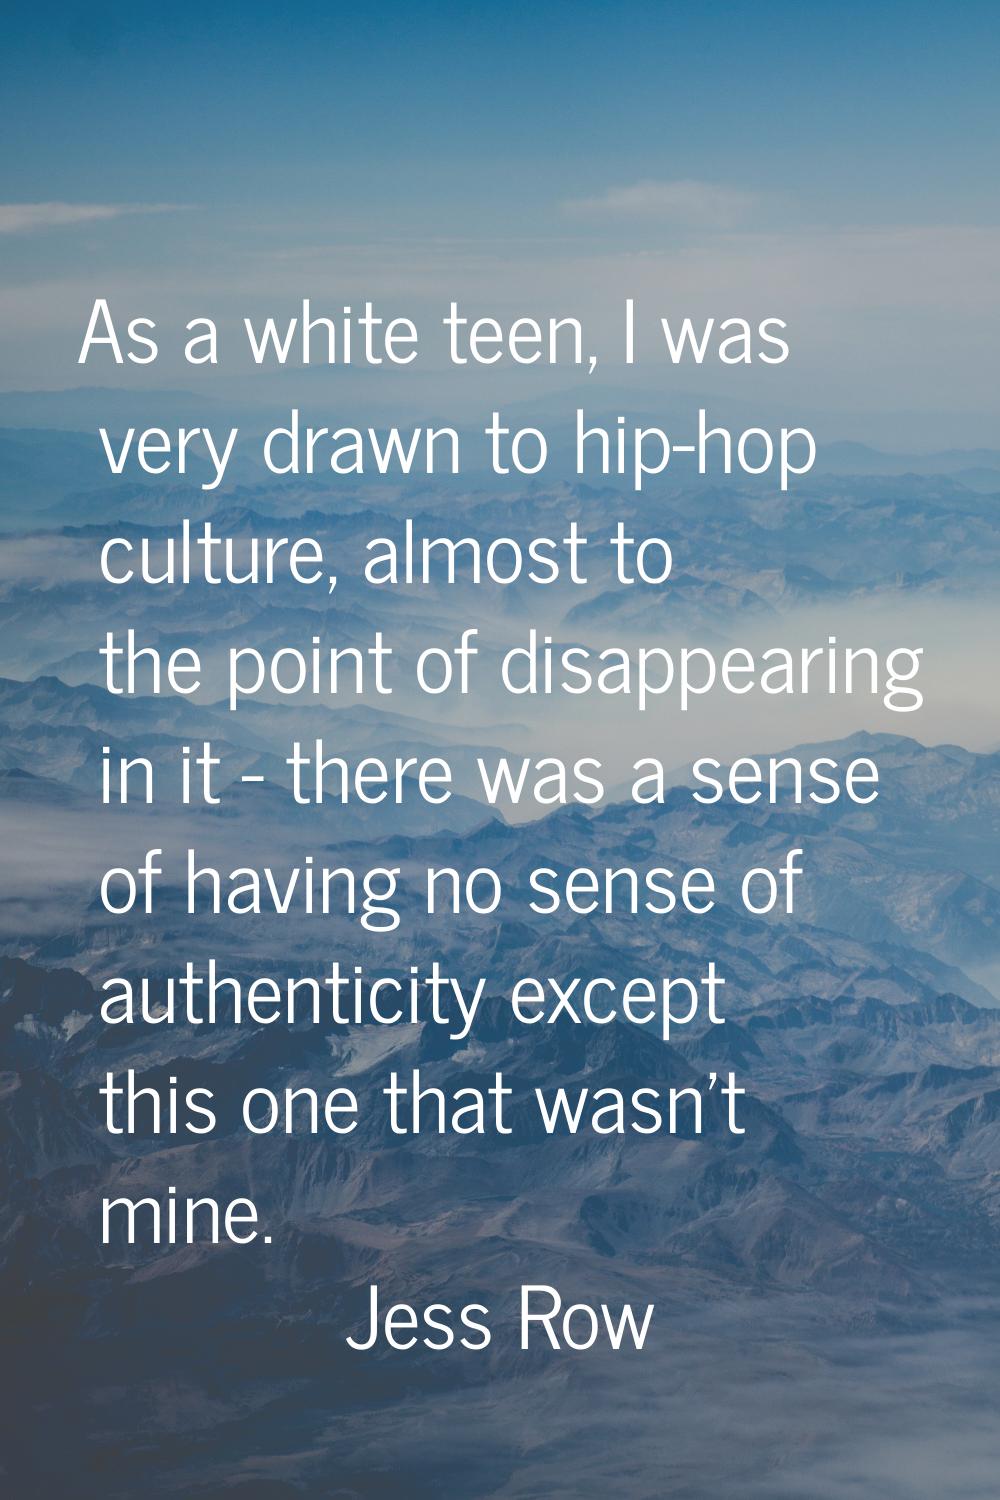 As a white teen, I was very drawn to hip-hop culture, almost to the point of disappearing in it - t